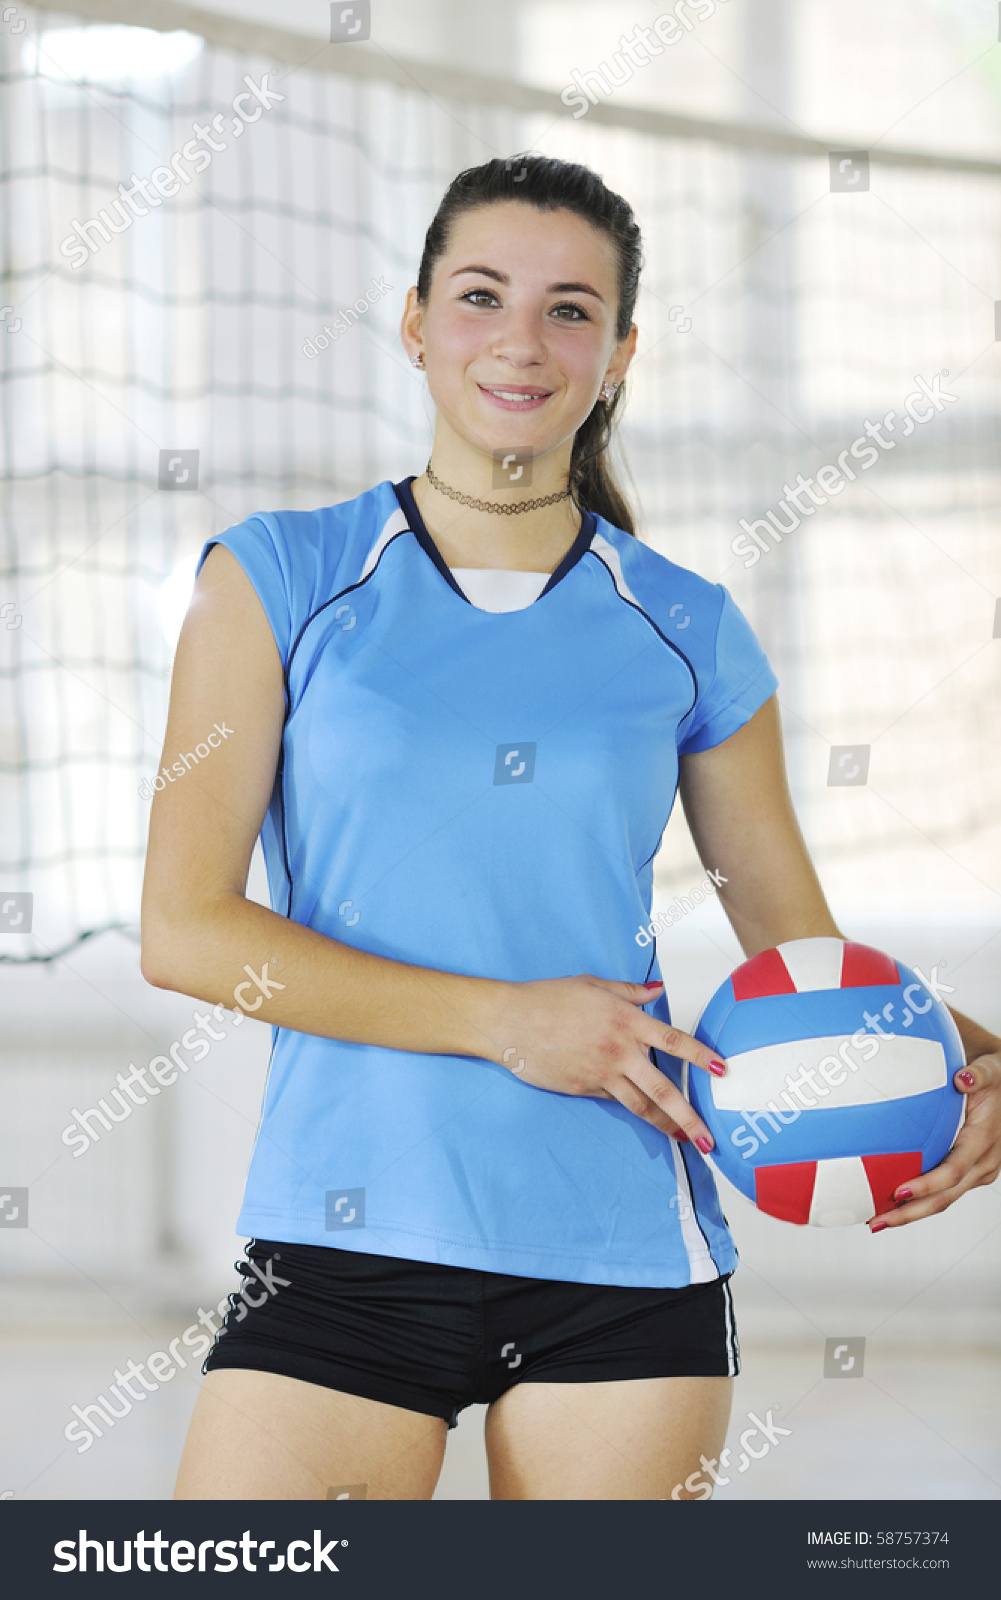 Volleyball Game Sport Group Young Beautiful Stock Photo 58757374 ...